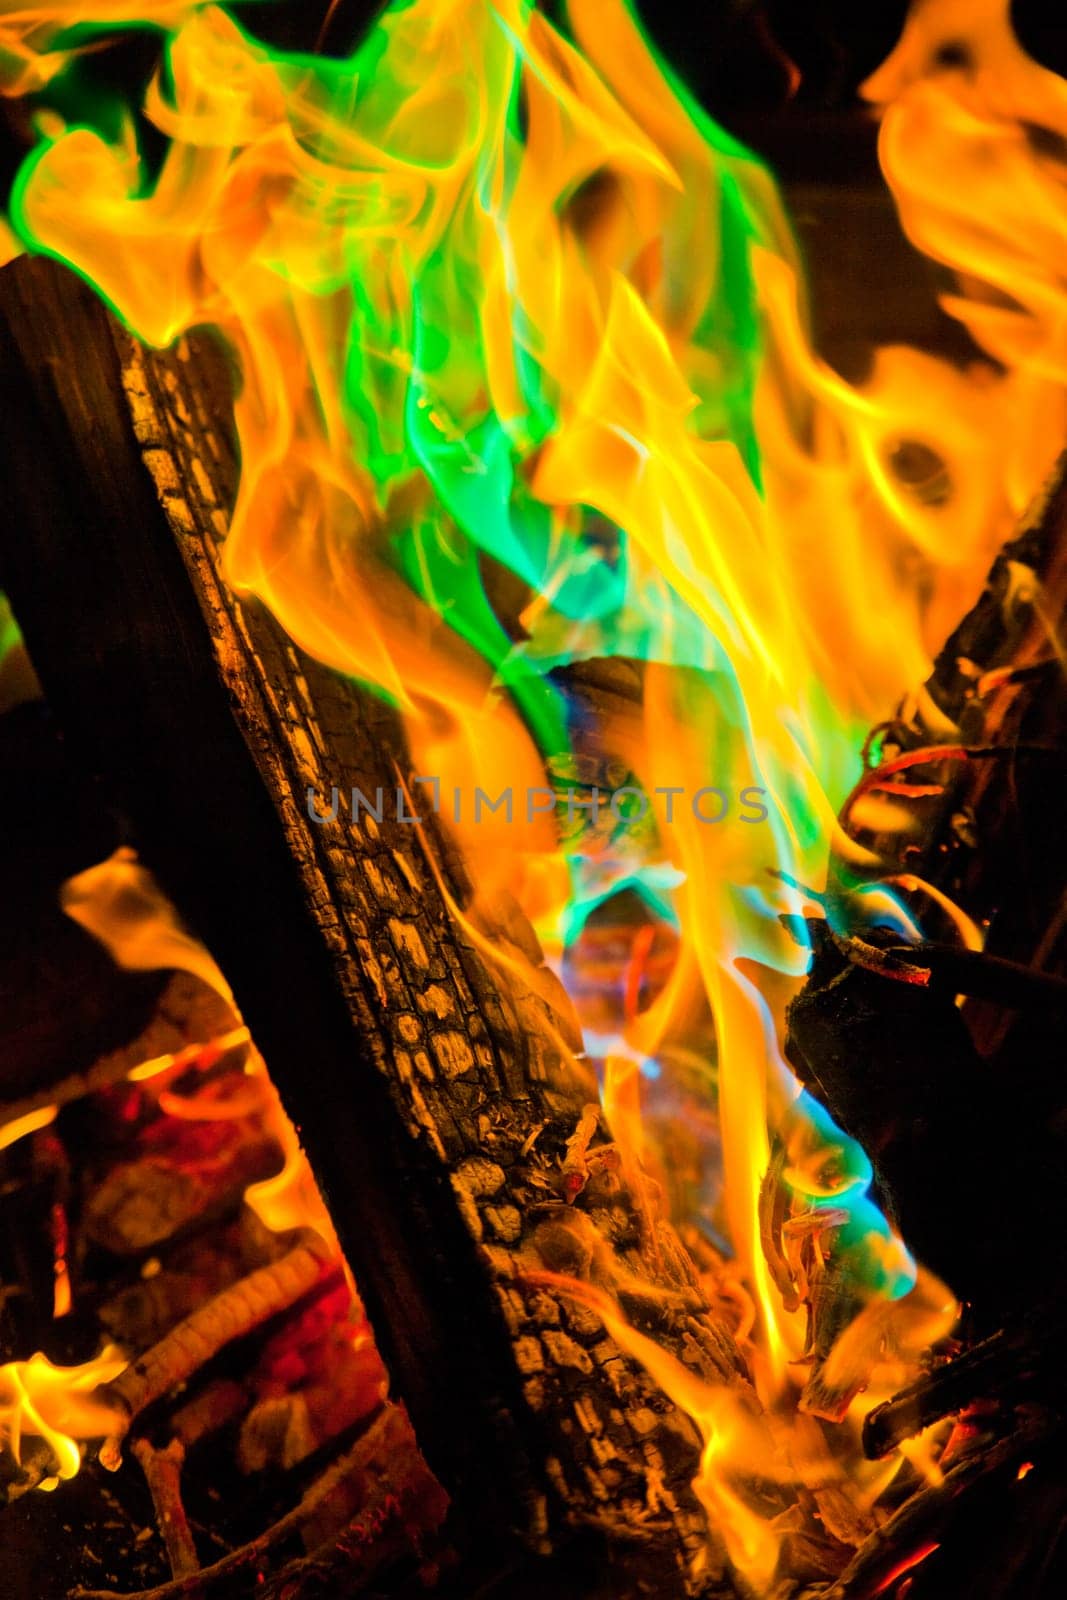 Dancing Flames in Multi-color Display Close-up by njproductions